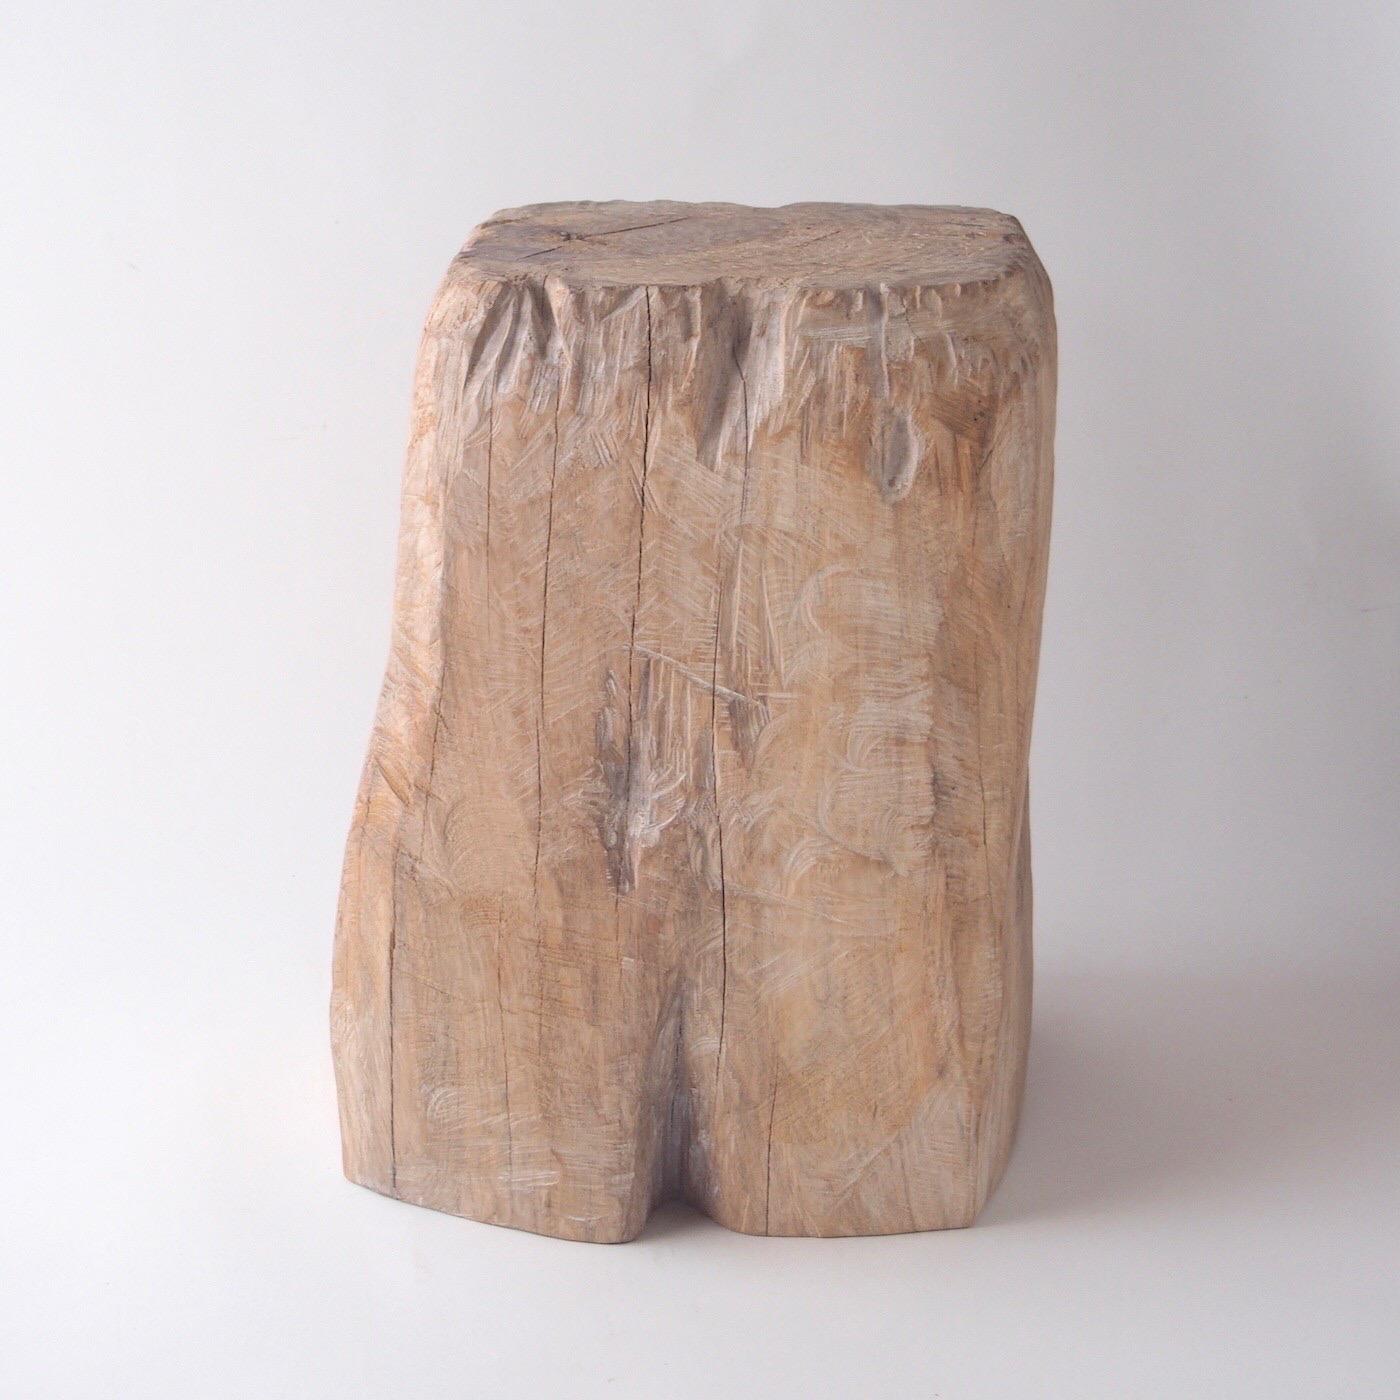 Name: Torso
Sculptural stool by Zogei carved furniture
Material: Zelkova
This work is carved from log with some kinds of chainsaws.
Most of wood used for Nishimura's works are unable to use anything, these woods are unsuitable material for